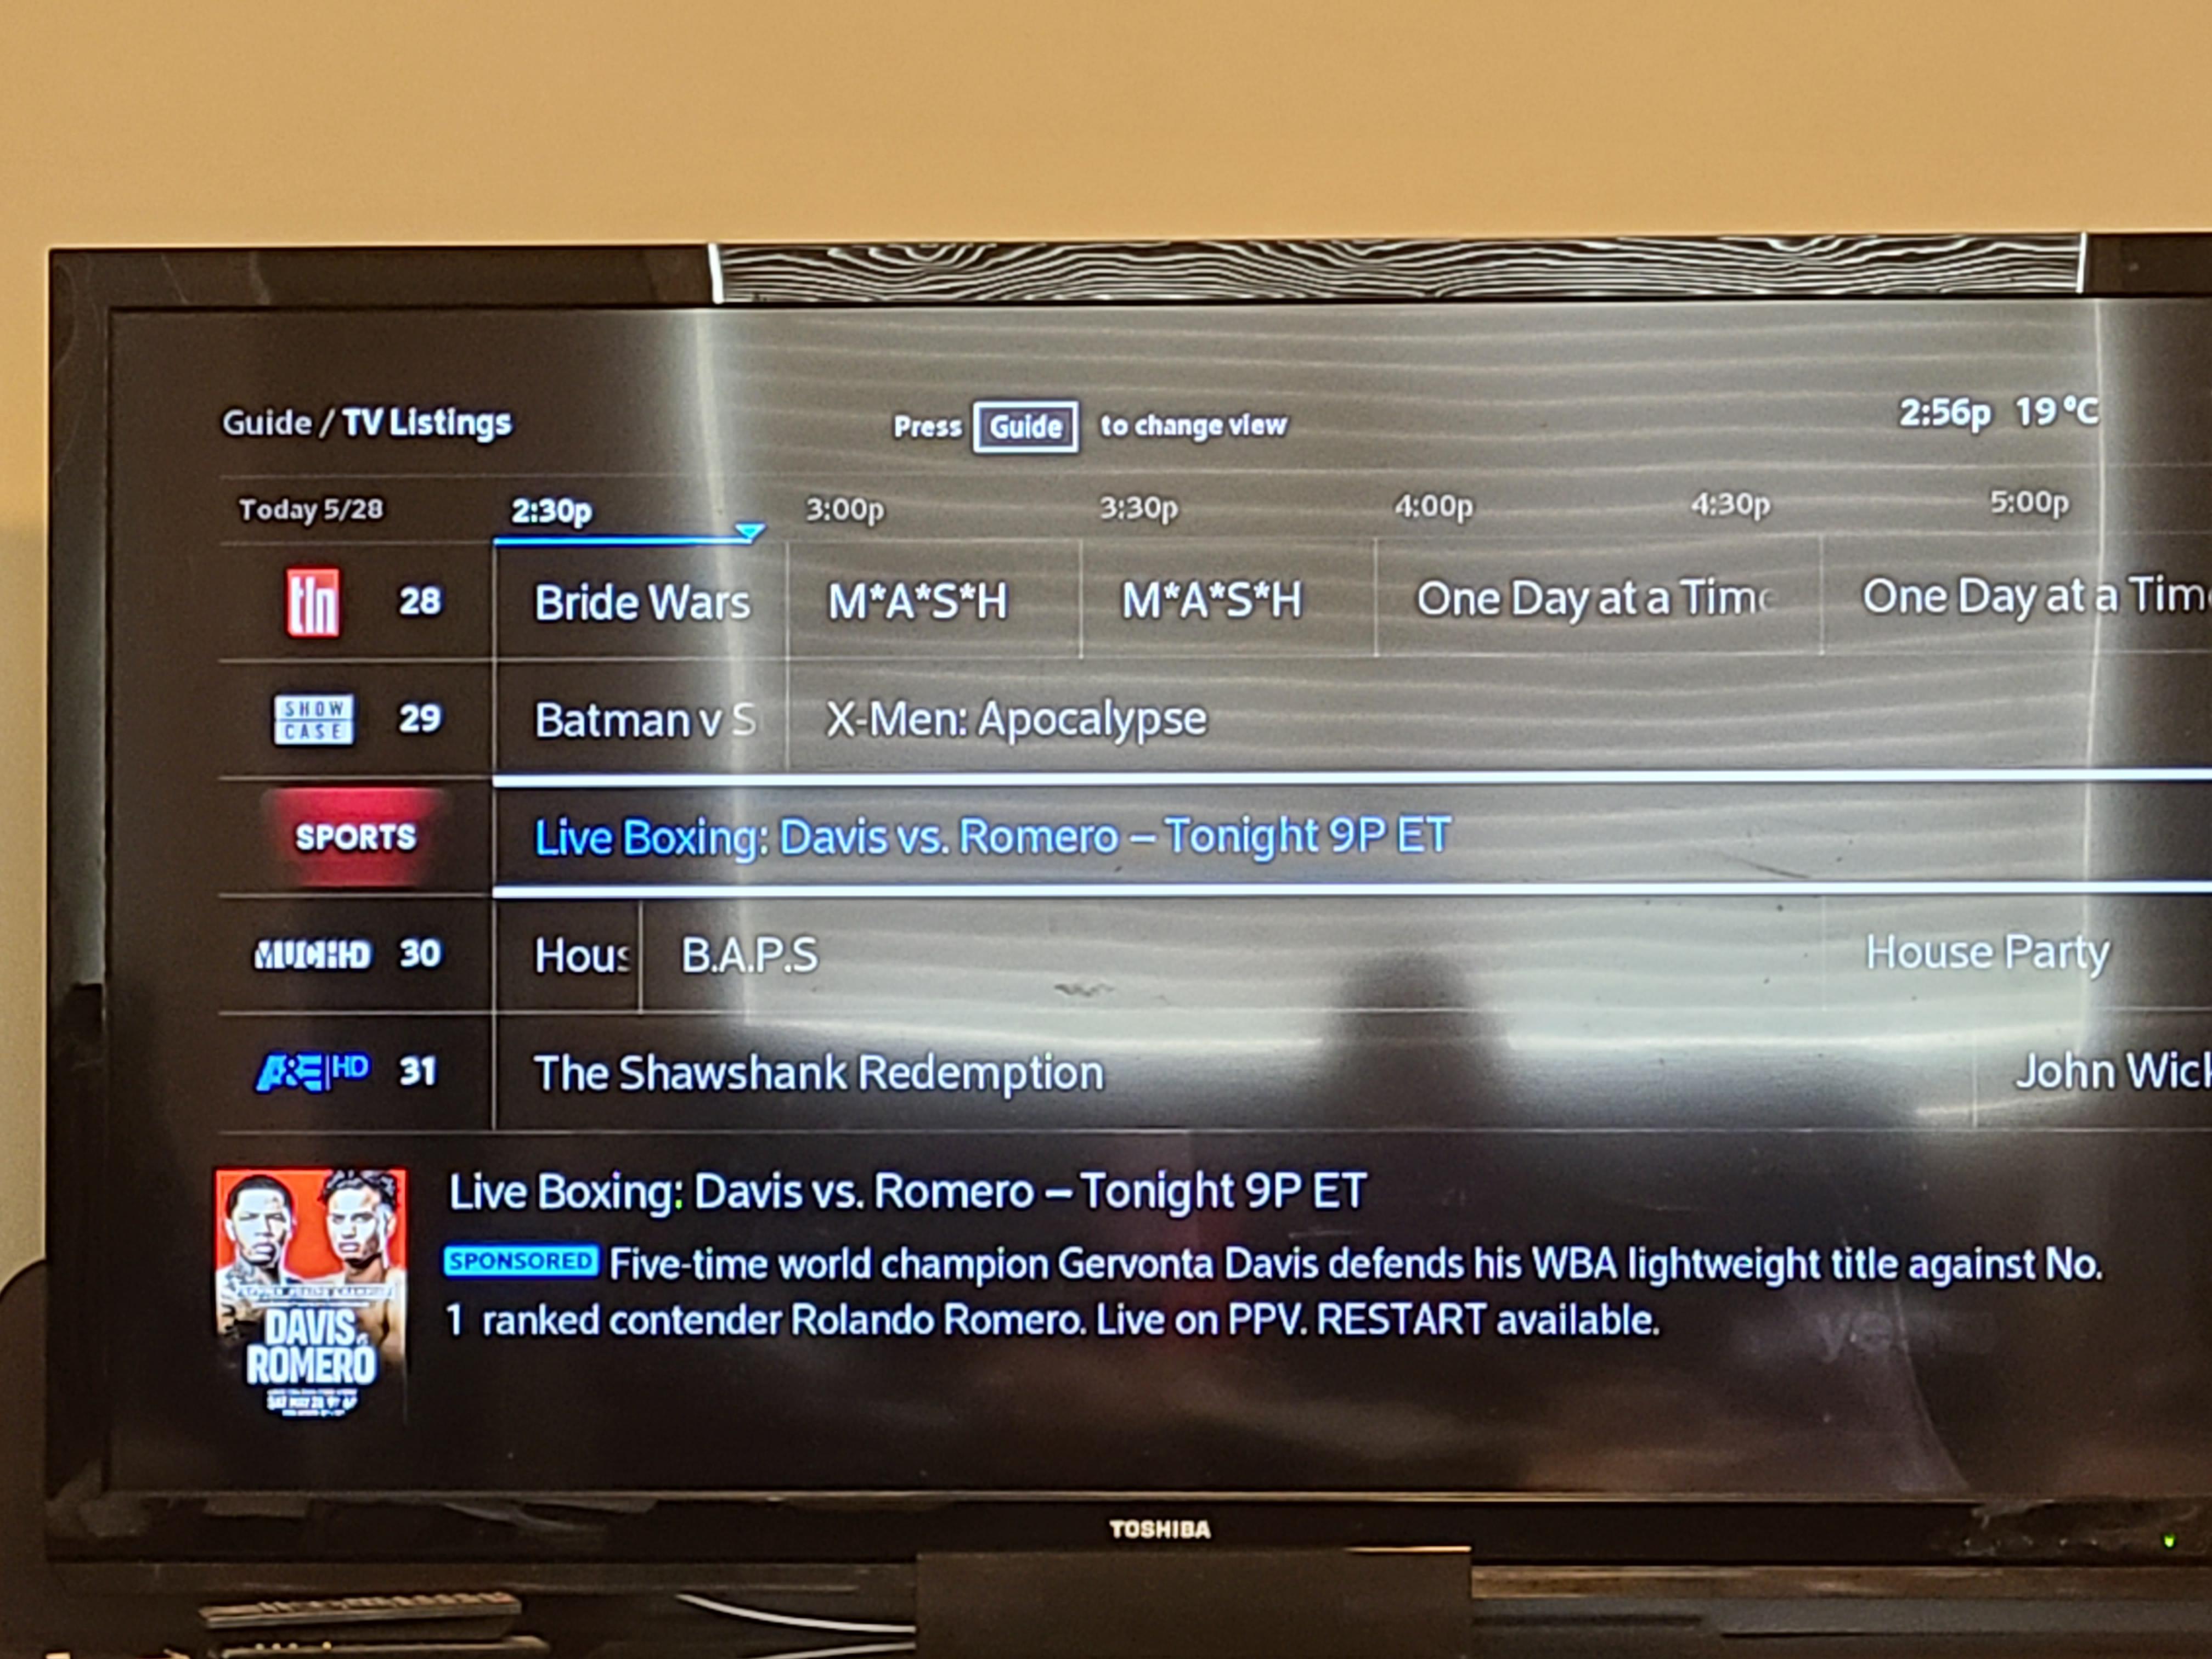 rogers cable television guide